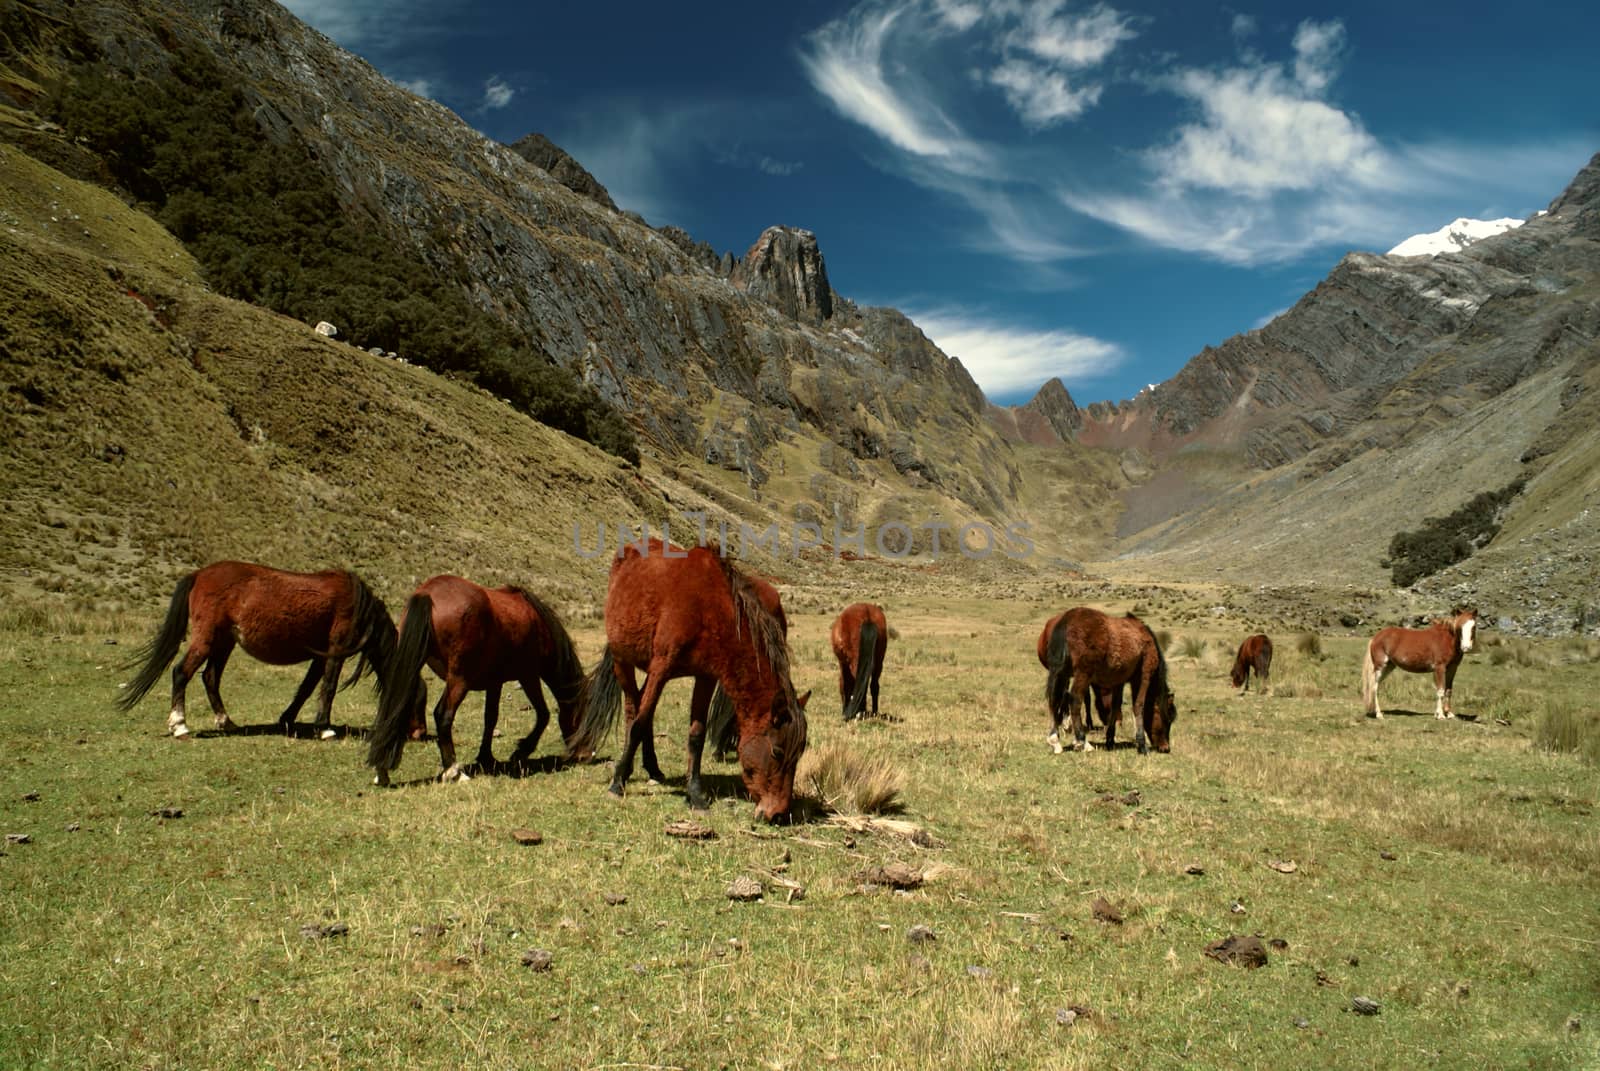 Horses in Andes by MichalKnitl